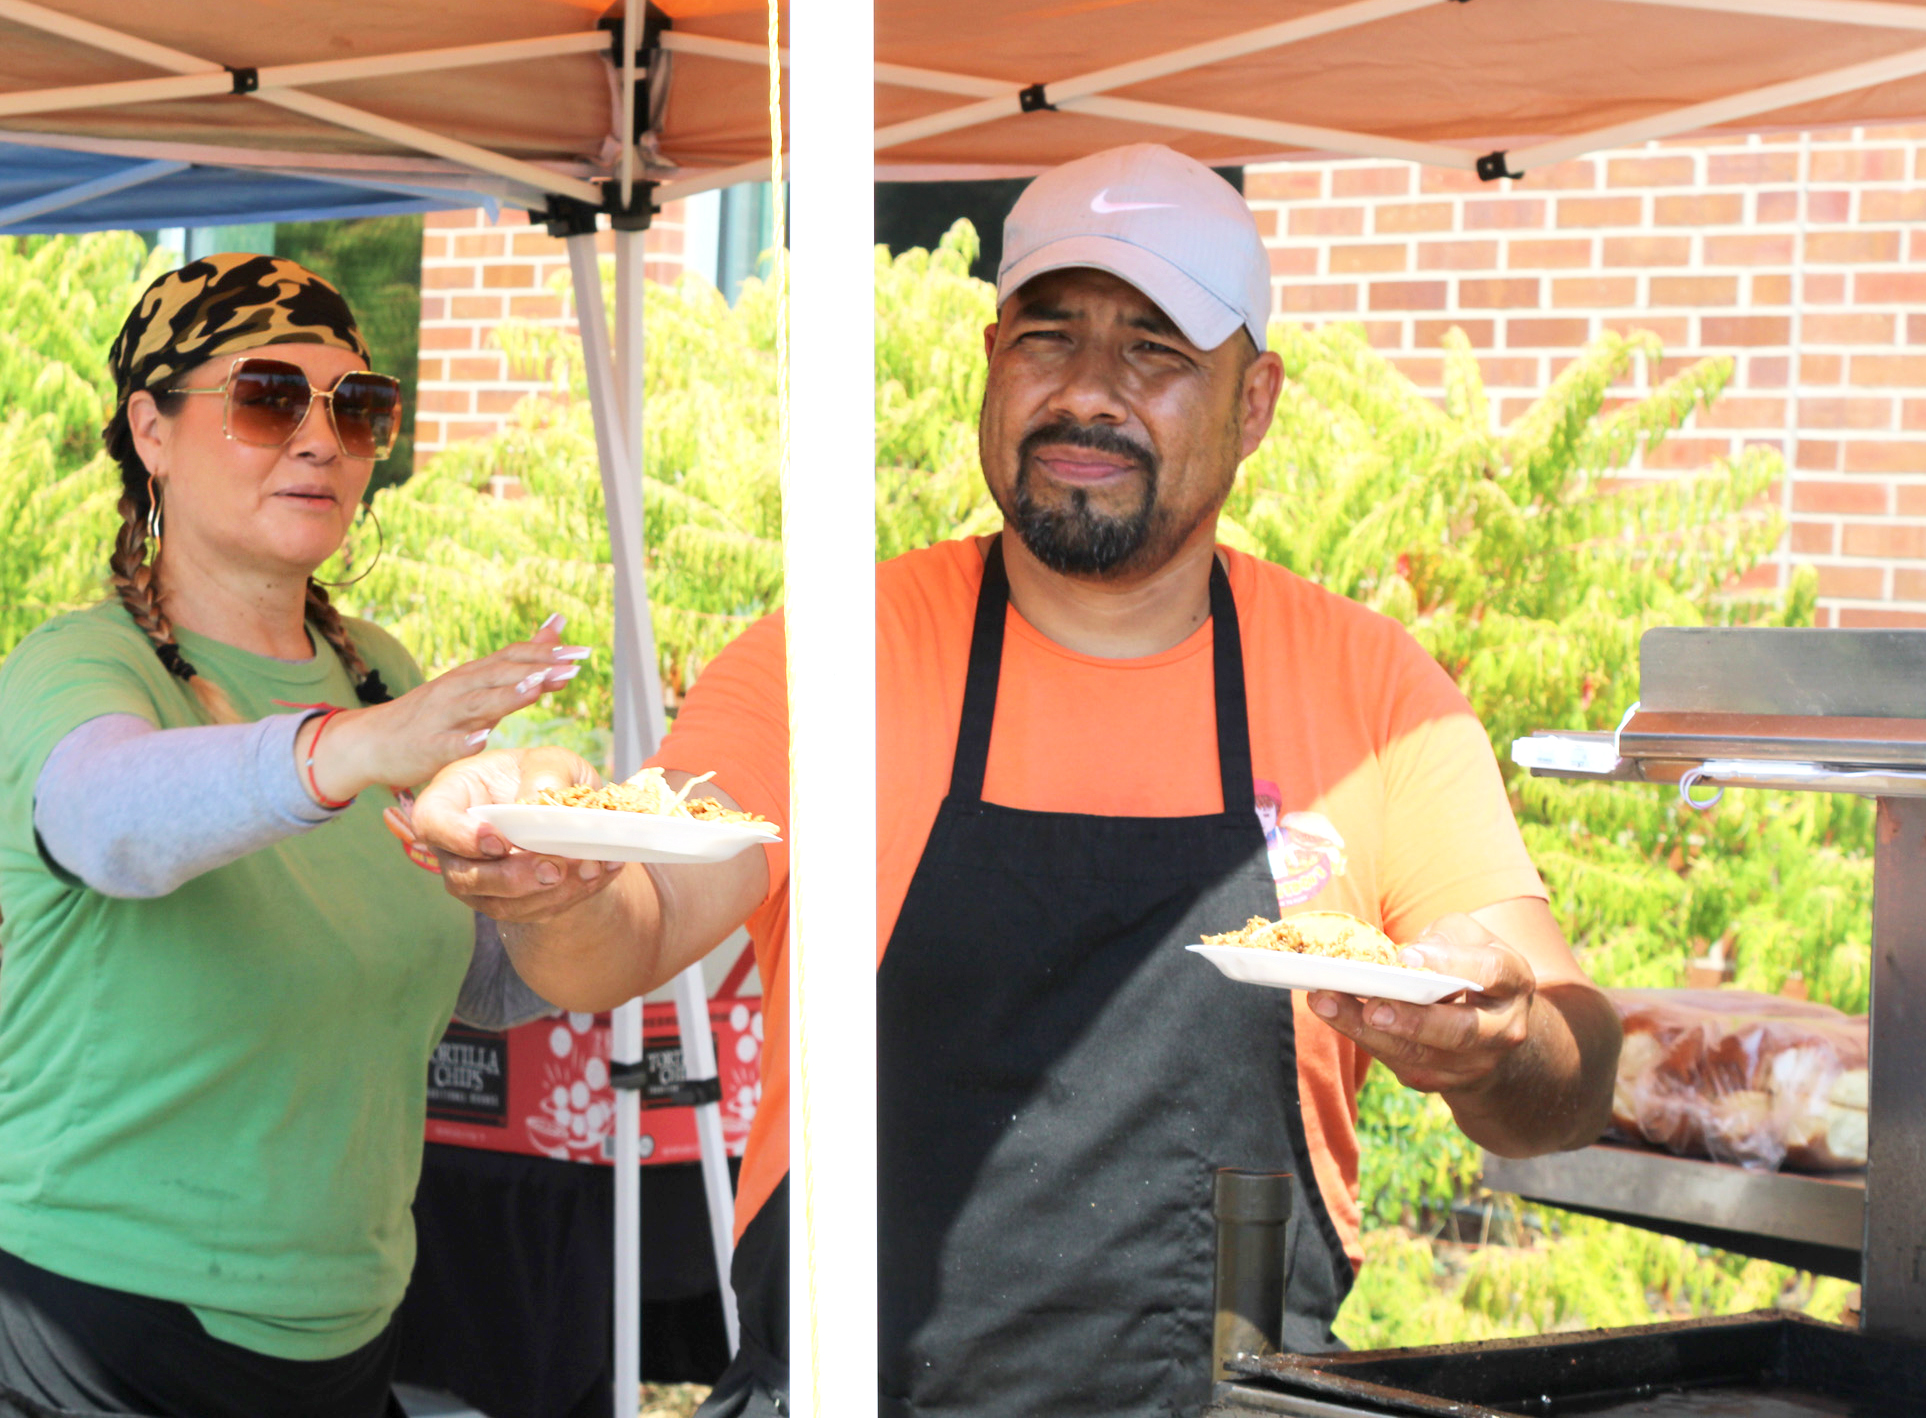 Julio Mireles and Carmencita Mireles help serve food at the Food Truck Friday event on Sept. 8. Latino Hot Dogs, also known as Elatino Dogos Y Hamburguesas, is ran by Julio and his partner Carmencita. 